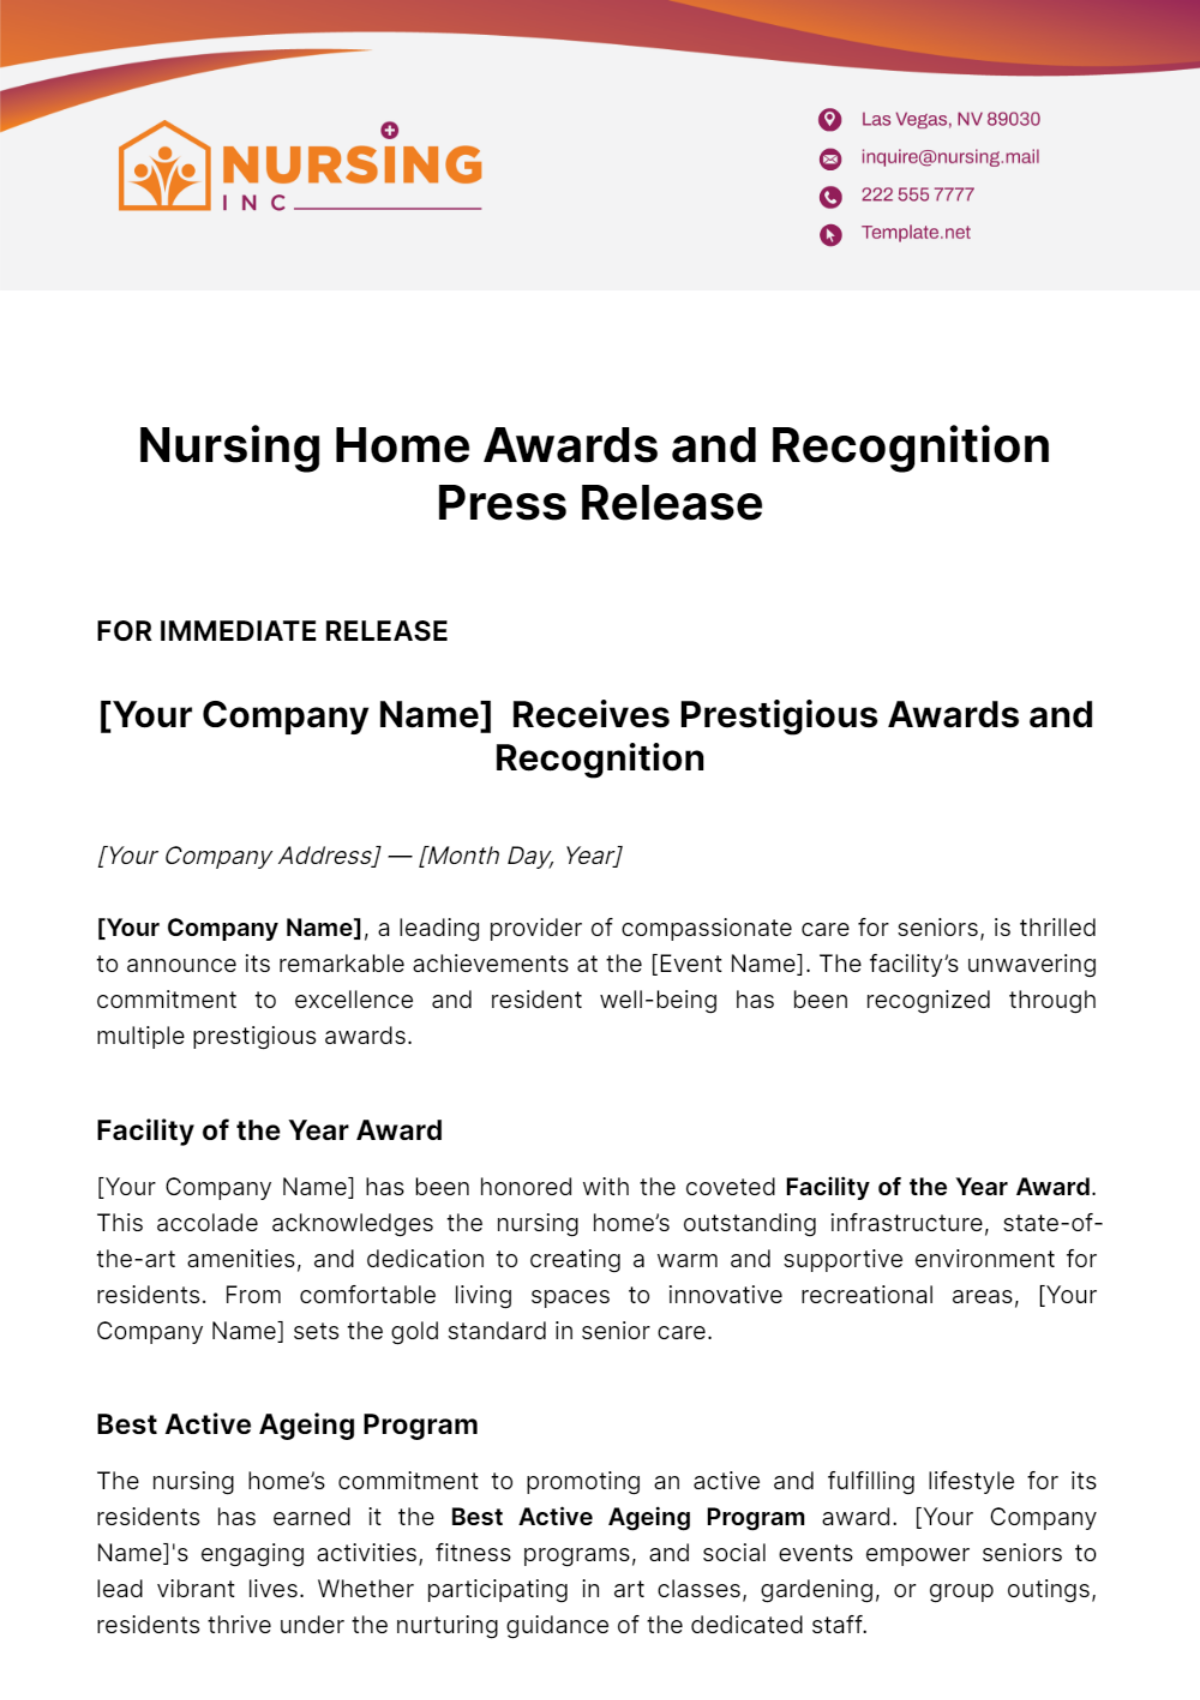 Free Nursing Home Awards and Recognition Press Release Template